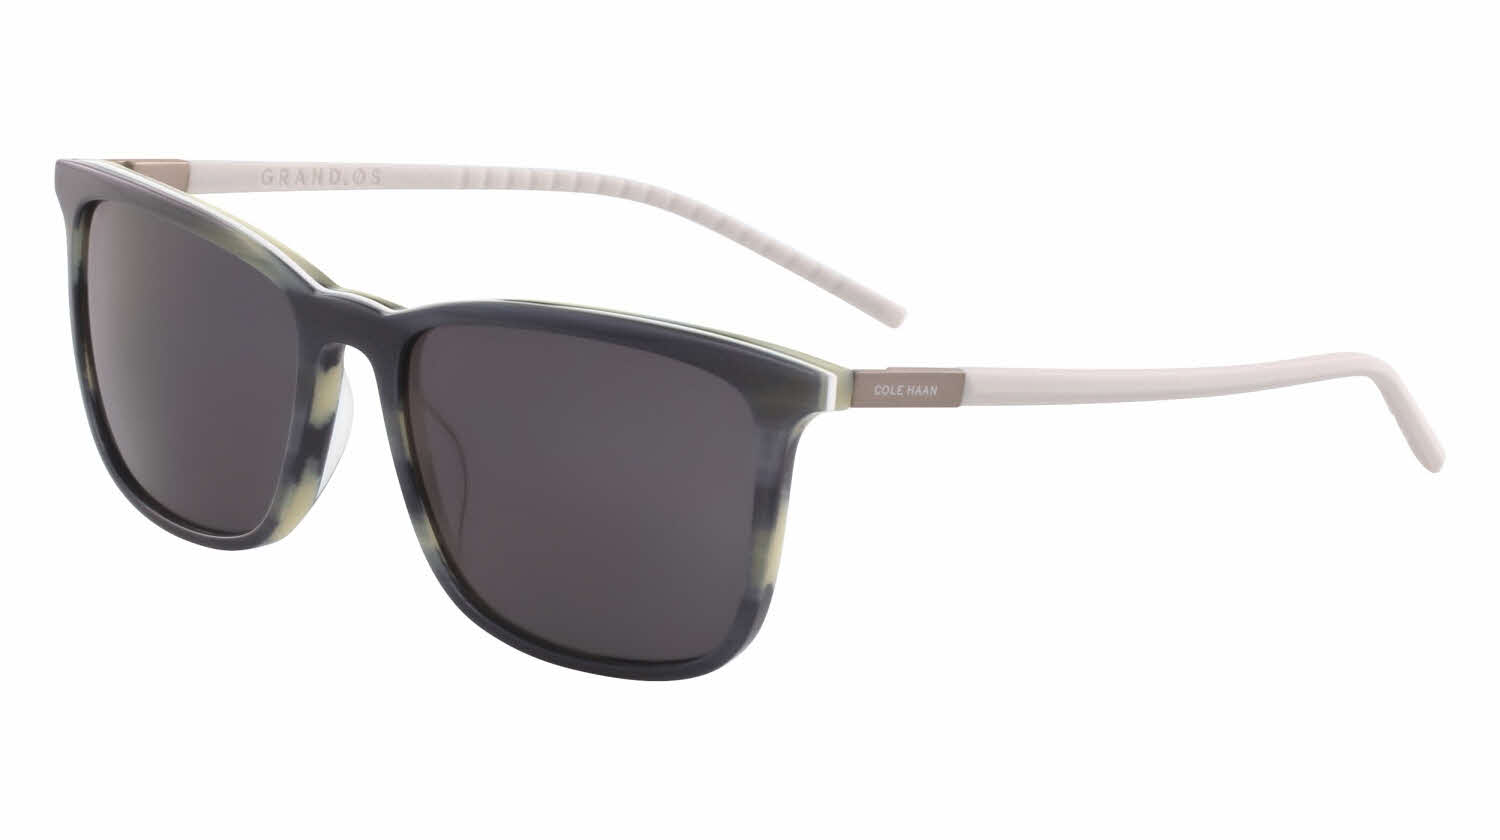 Cole Haan CH6064 Sunglasses